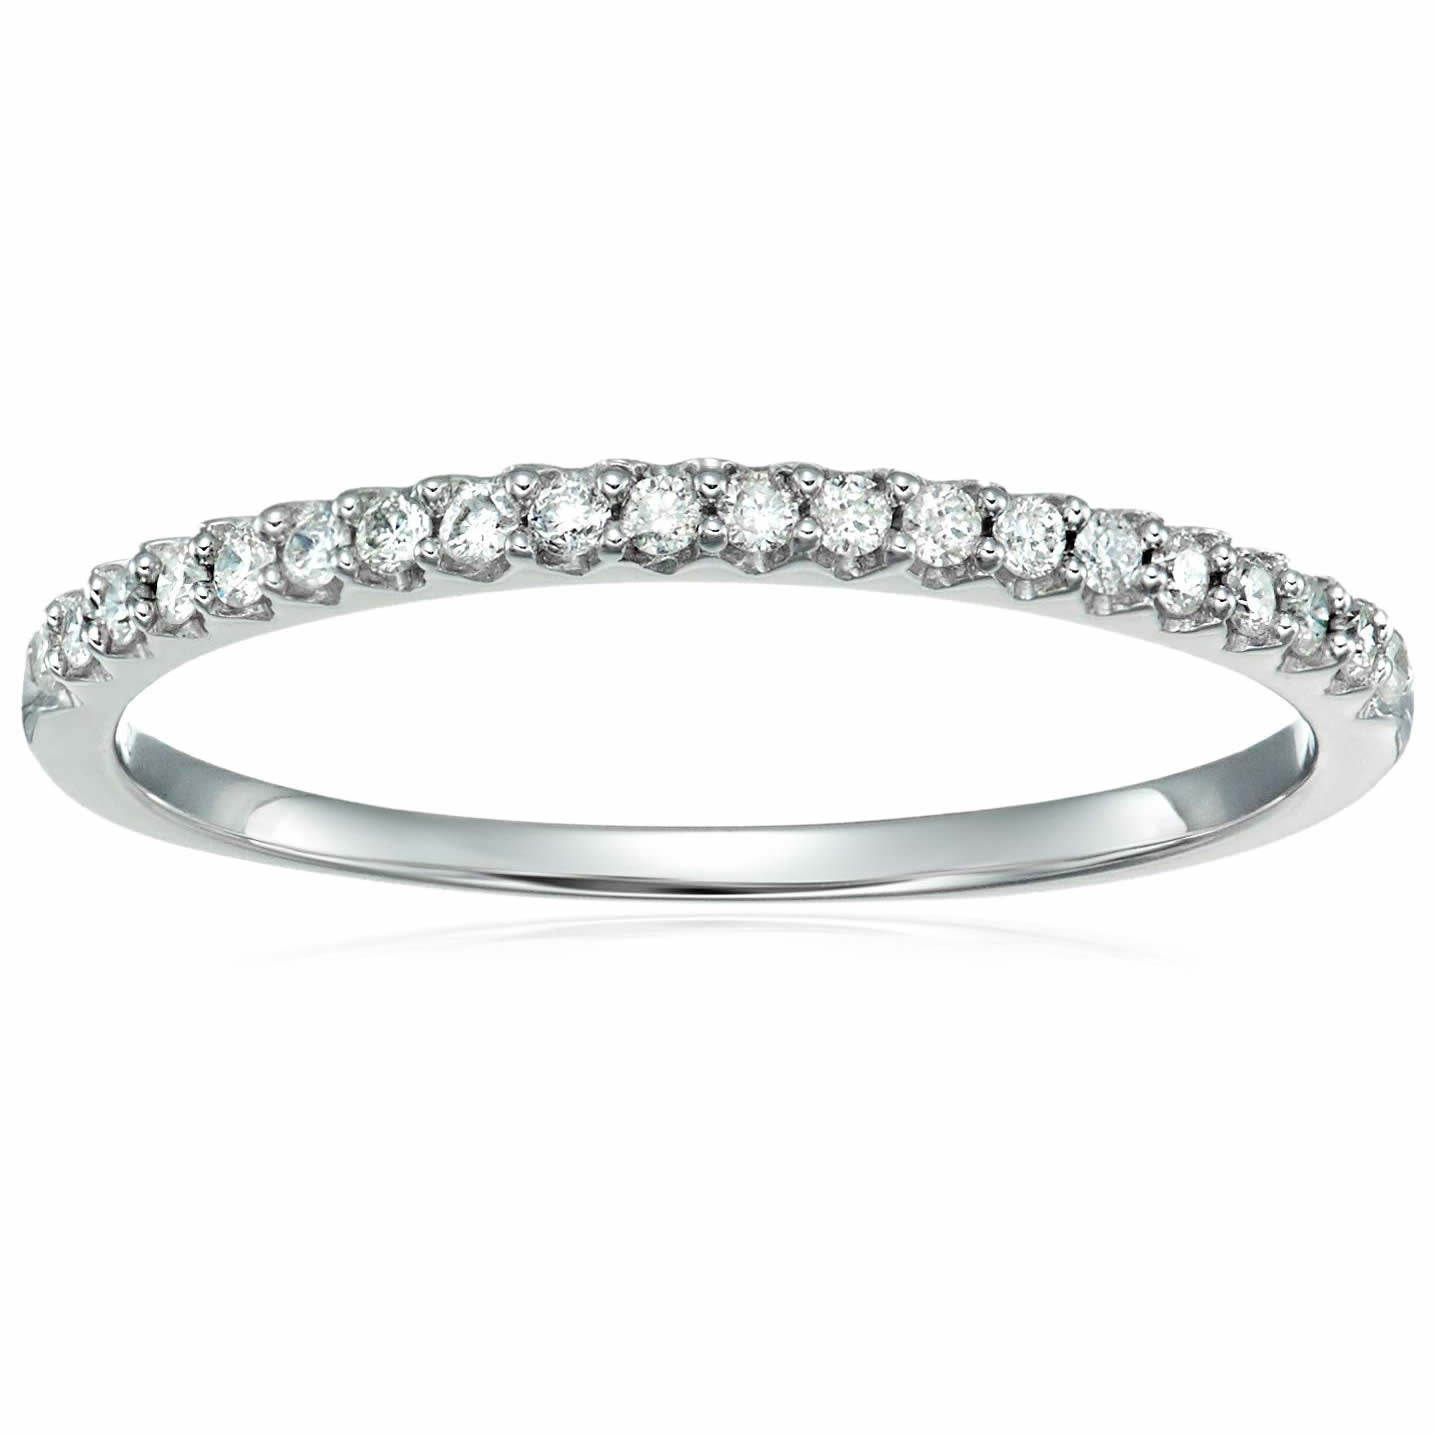 1/6 ctw Micropave Diamond Wedding Band in 14K White Gold Size 5